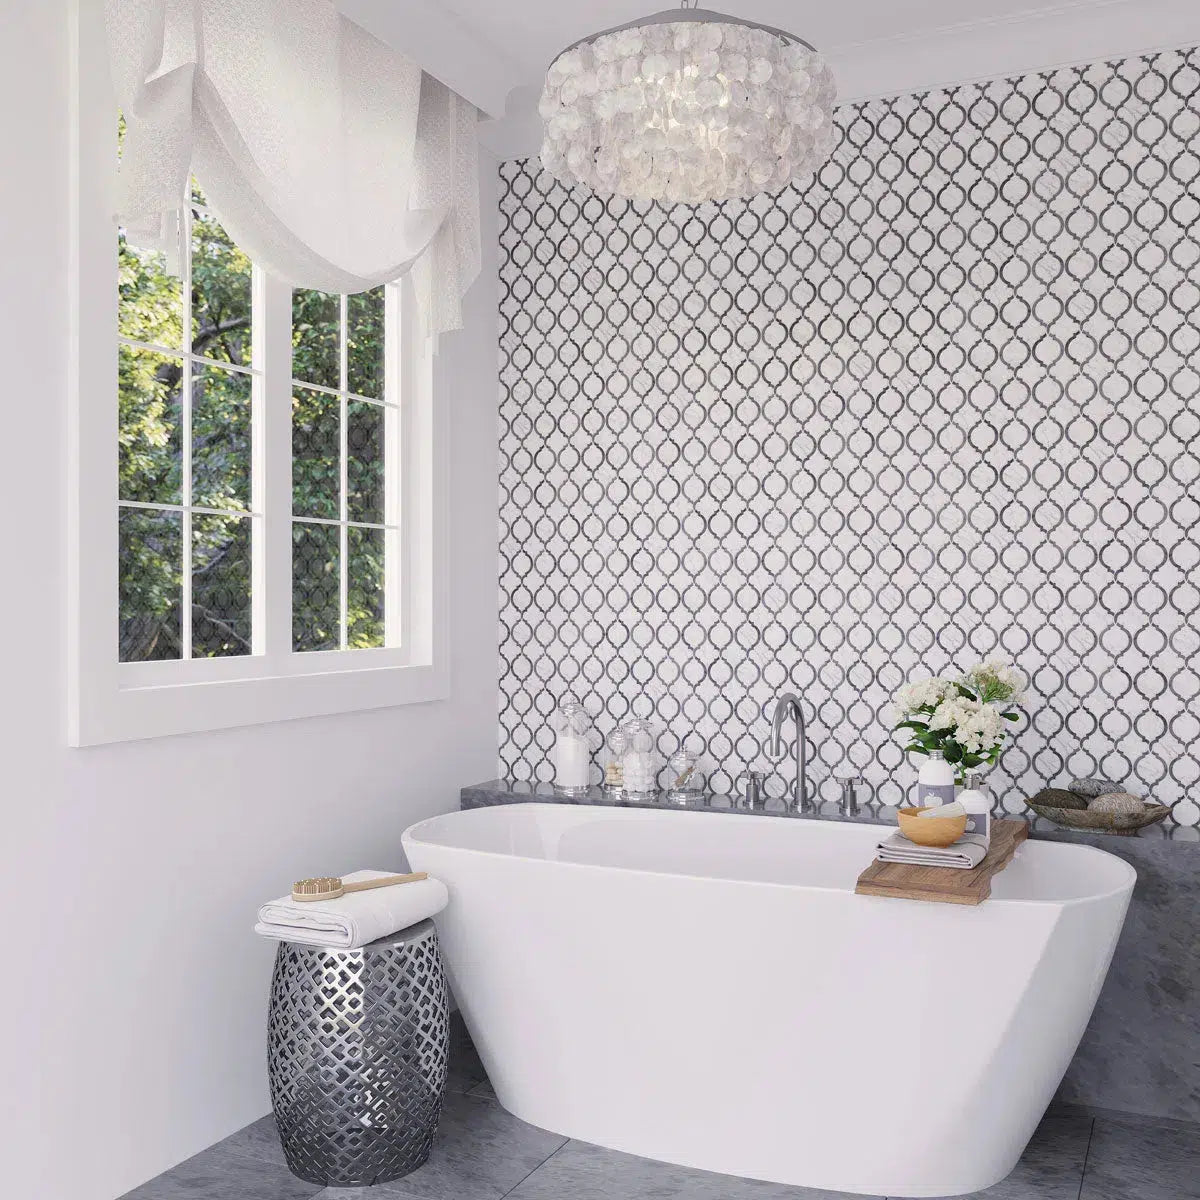 Bathroom Accent wall with Arabesque Tile Carrara Marble in gray and white